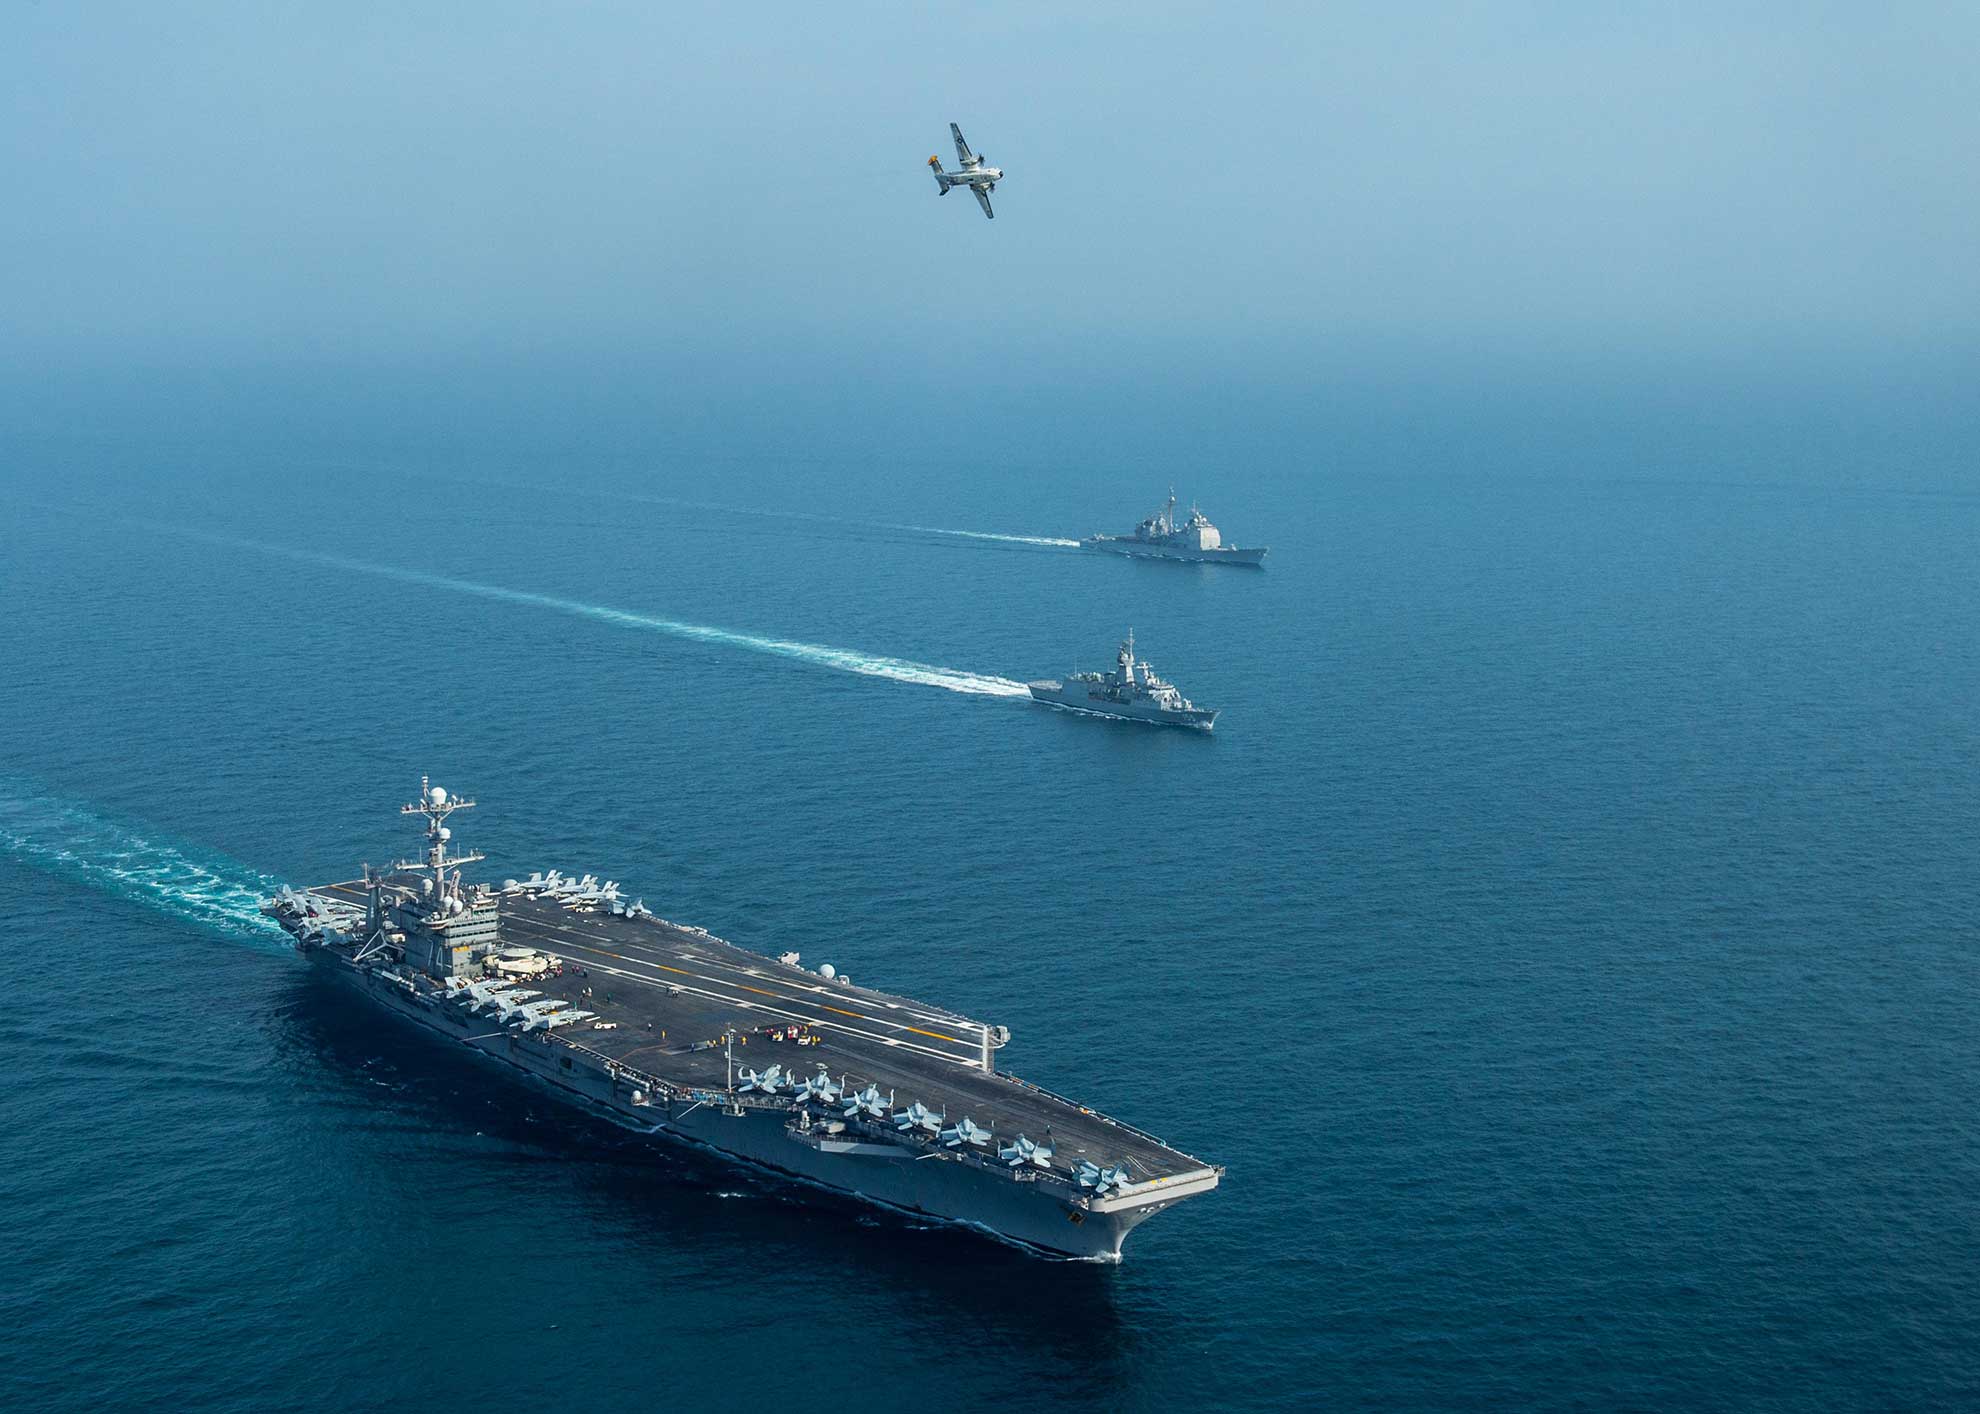 Arabian Gulf (Jan. 16, 2019) The aircraft carrier USS John C. Stennis (CVN 74),left, and the Royal Australian Navy frigate HMAS Ballarat (FFH 155), middle, and the guided-missile cruiser USS Mobile Bay (CG 53), sail in formation as a C-2A Greyhound, assigned to Fleet Logistics Combat Support Squadron (VRC) 30, detachment 4, conducts a flyover in the Arabian Gulf, Jan. 16, 2019, during exercise Intrepid Sentinel -- U.S. Navy photo by MCS3 Jake Greenberg. -